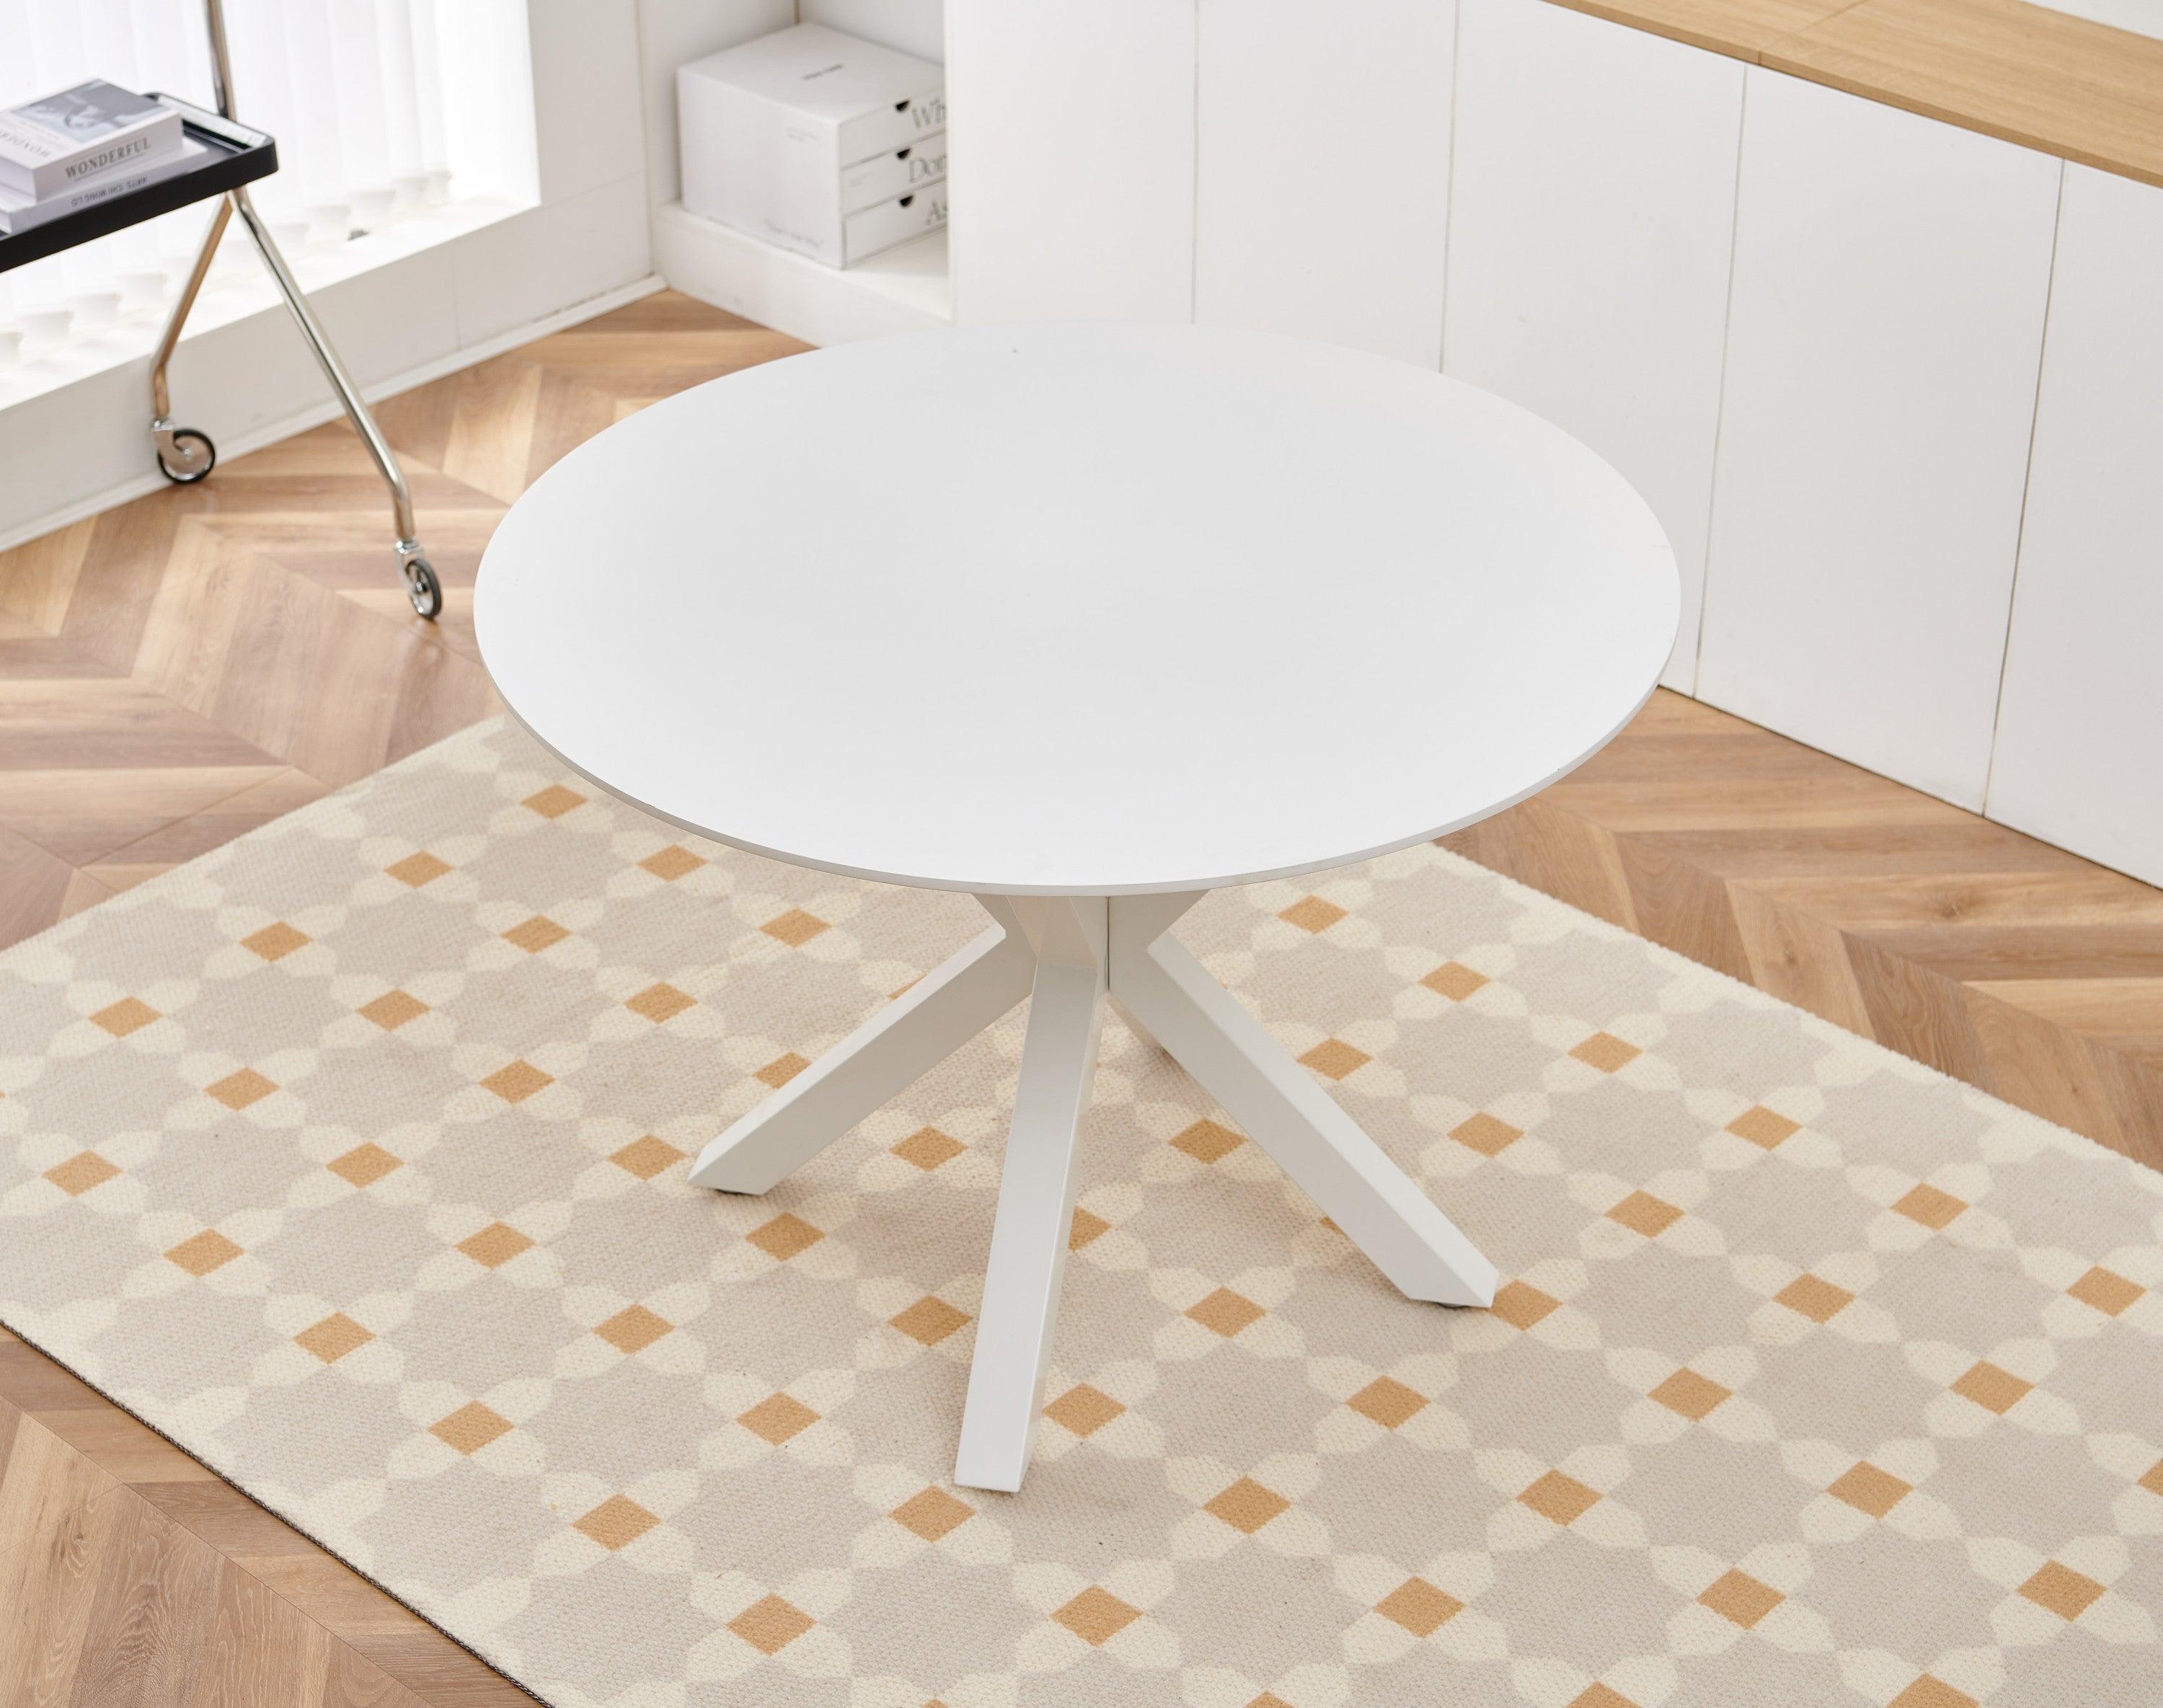 42.1" WHITE Table Mid-century Dining Table for 4-6 people With Round Mdf Table Top, Pedestal Dining Table, End Table Leisure Coffee Table, Cross leg